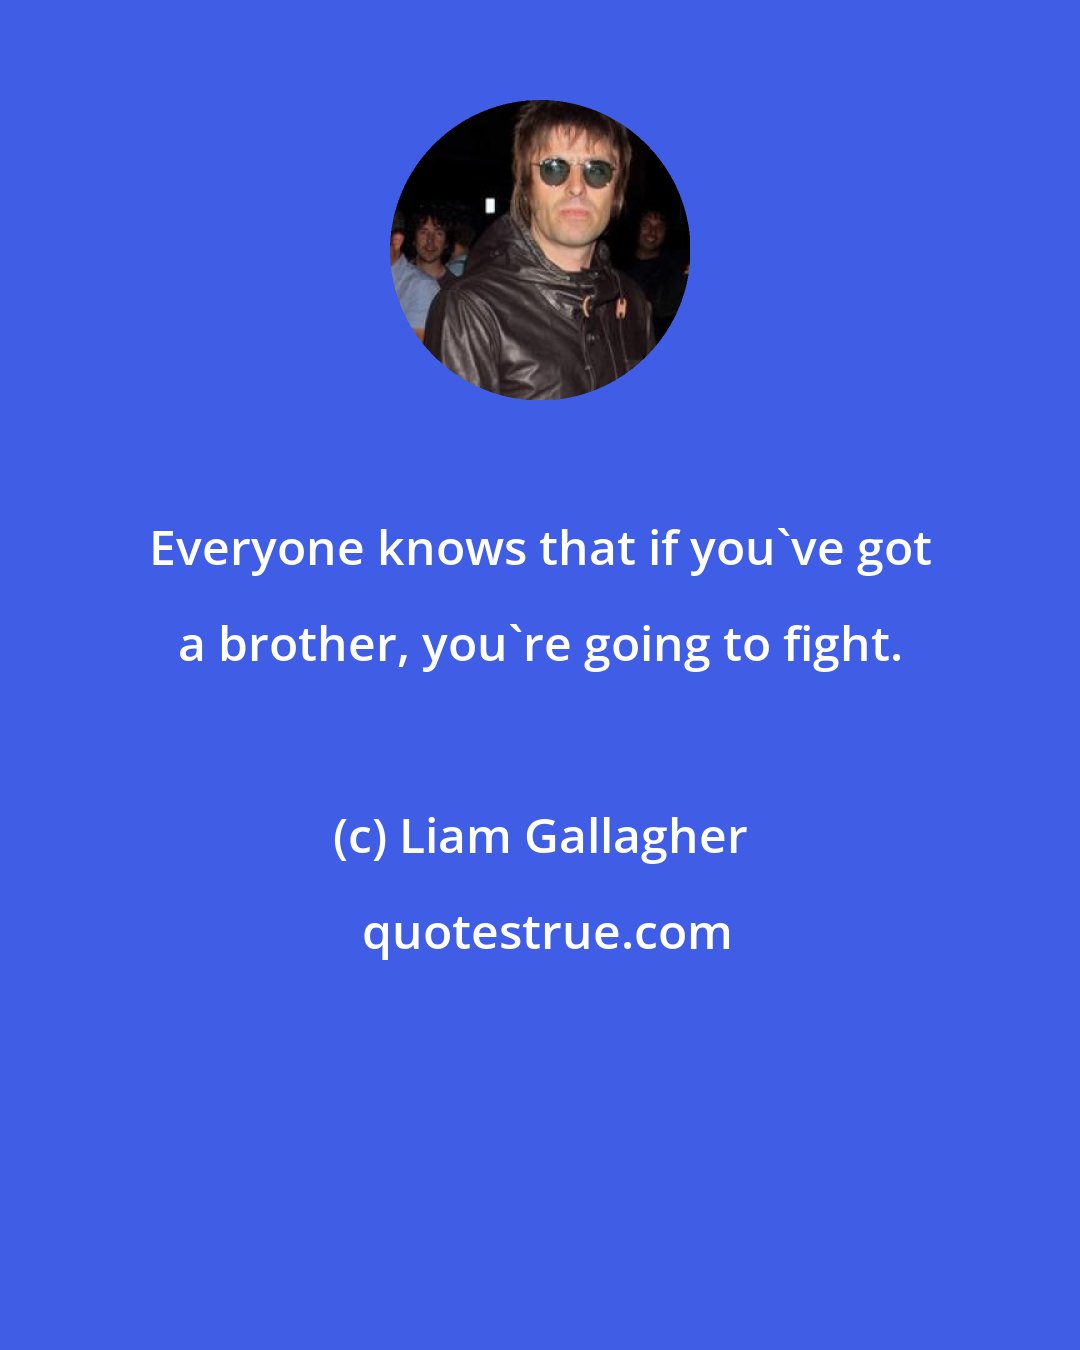 Liam Gallagher: Everyone knows that if you've got a brother, you're going to fight.